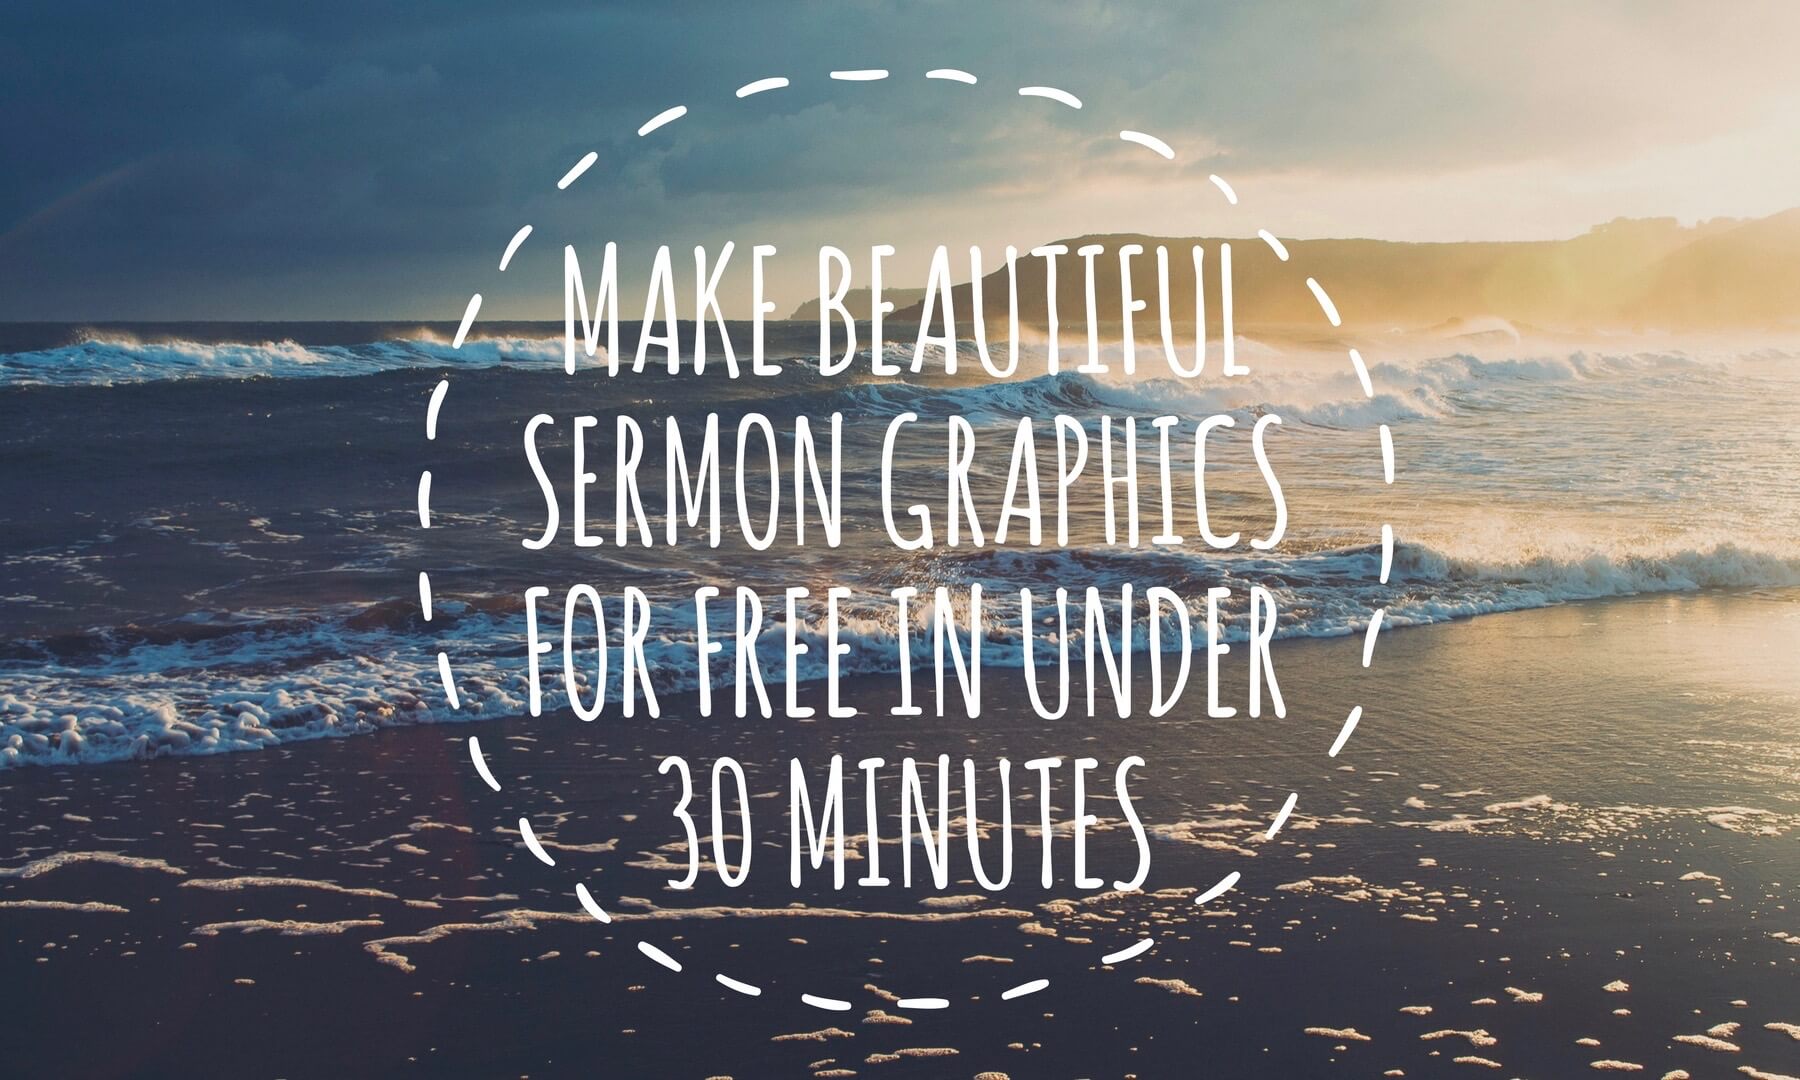 How to Make Beautiful Sermon Graphics for Free in Under 30 Minutes Using Canva